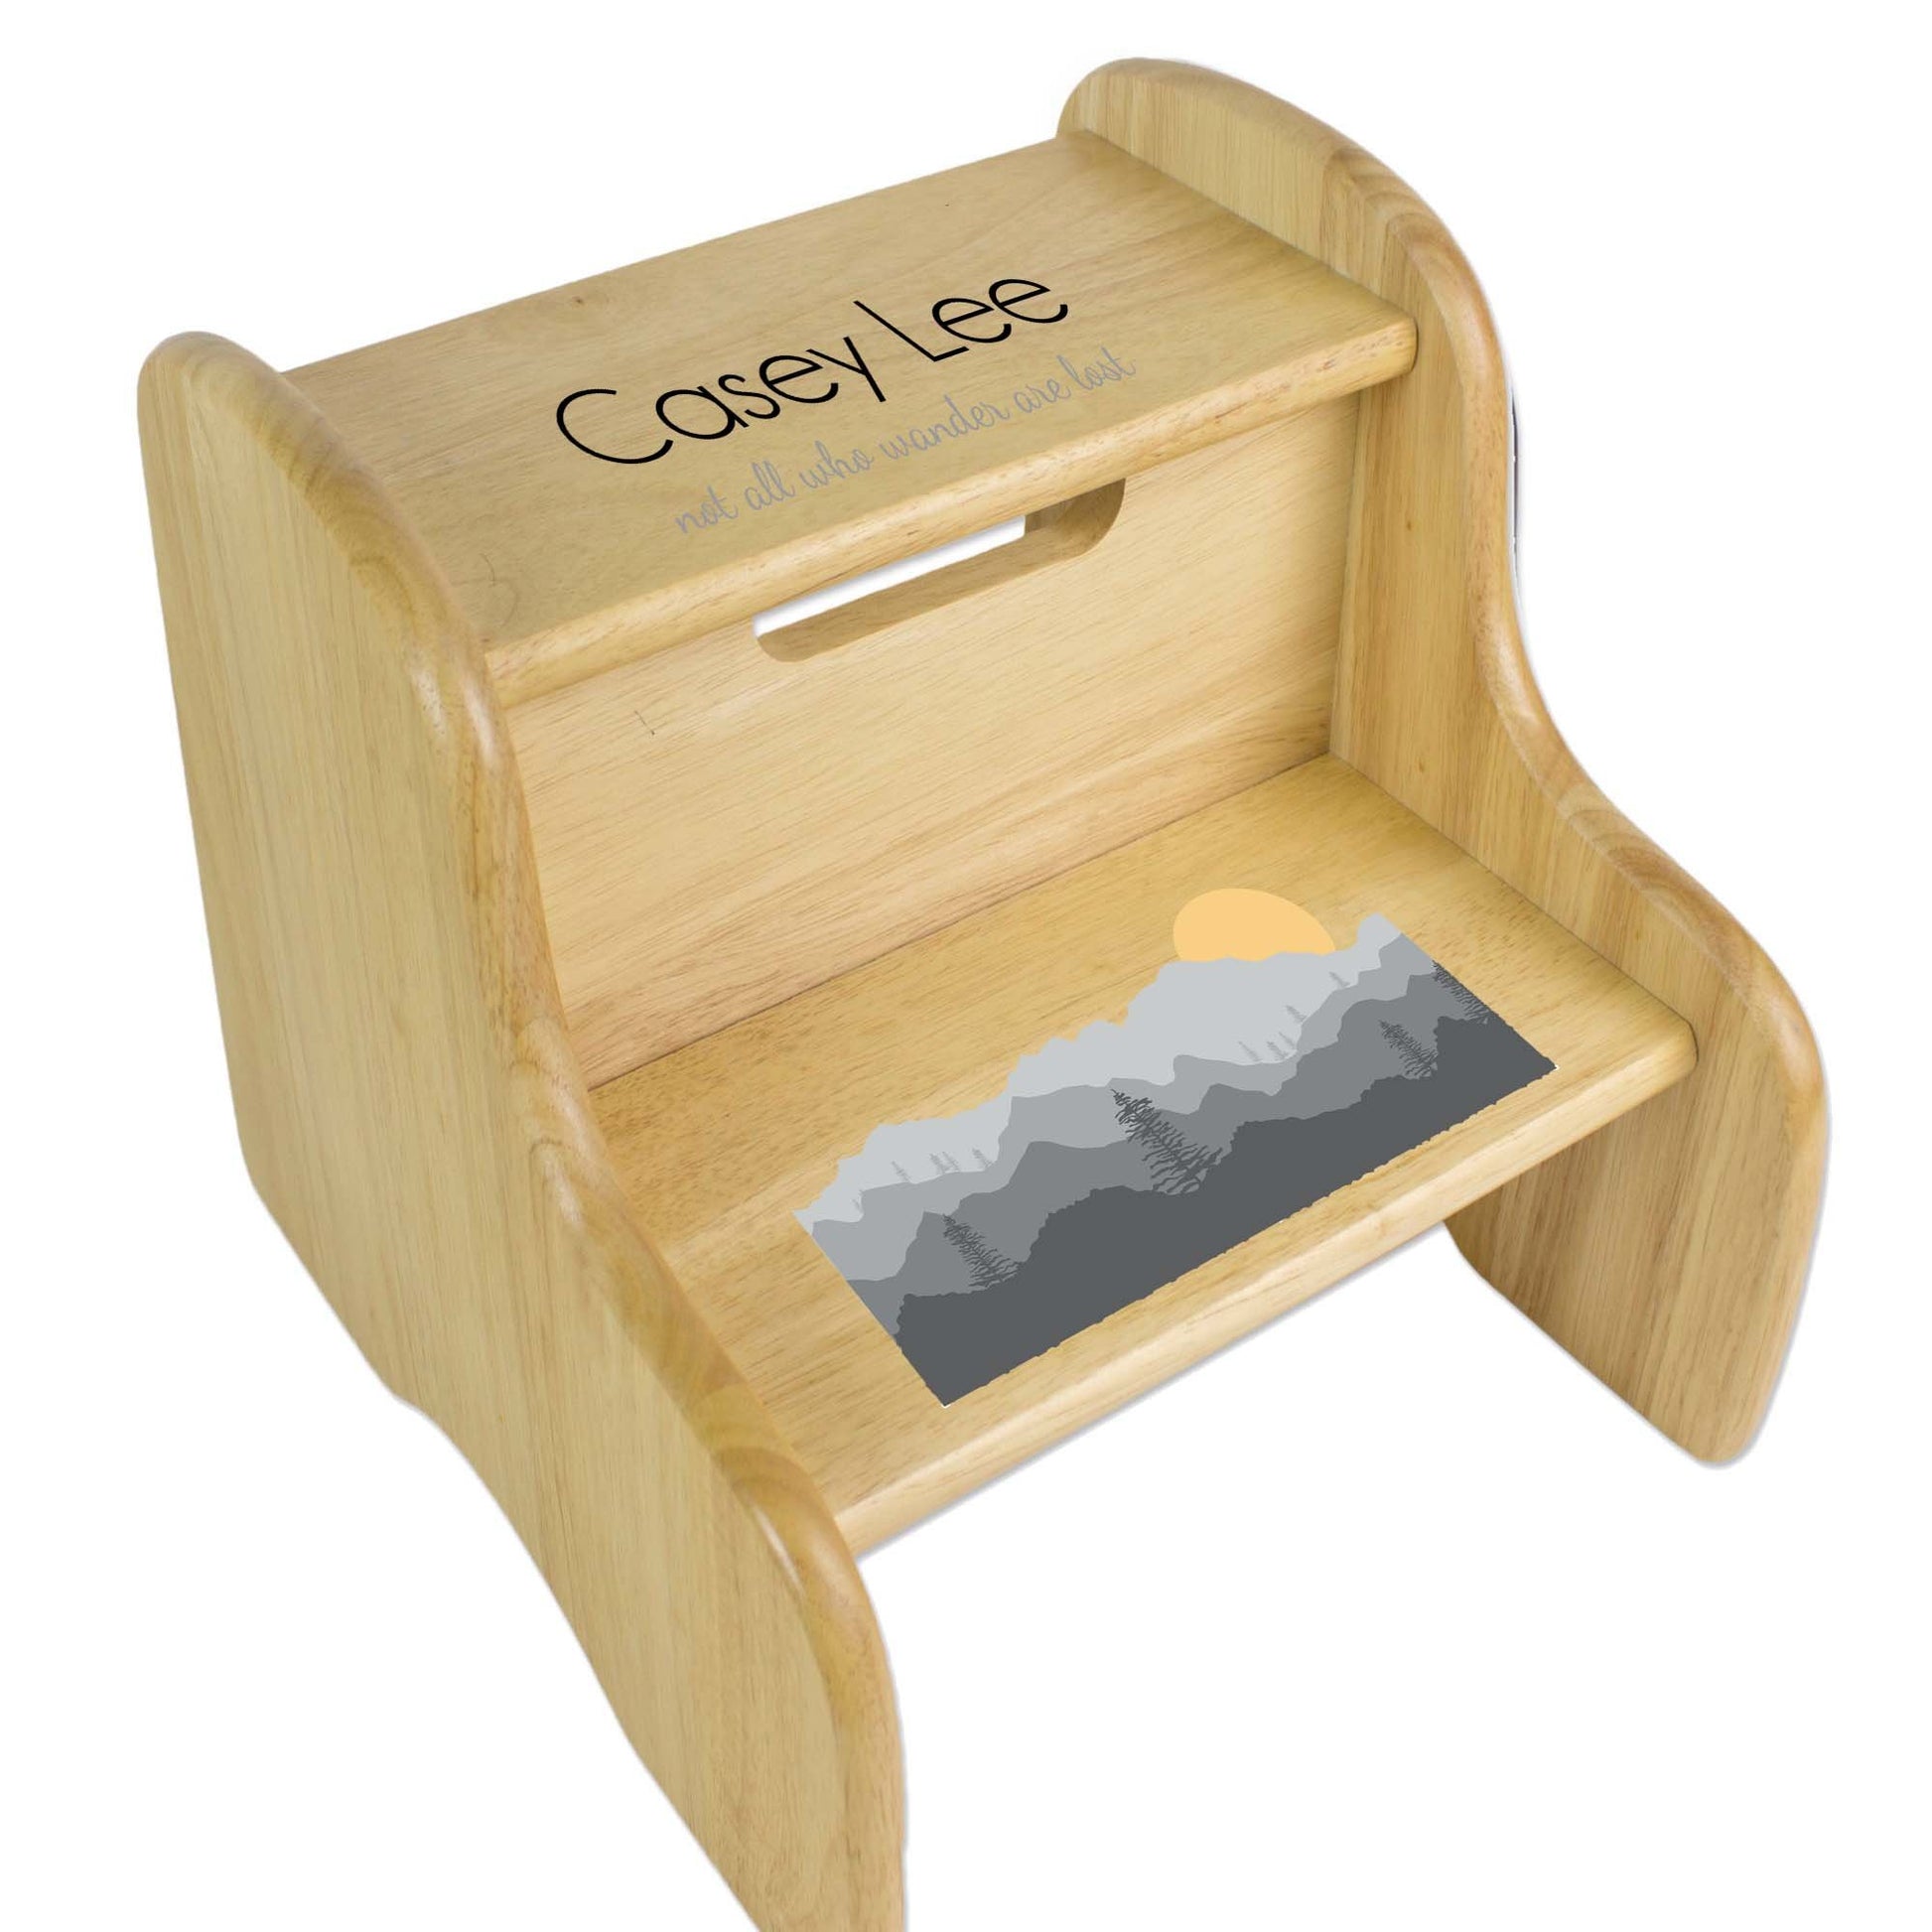 Personalized Wooden Step Stool With Surfer Design